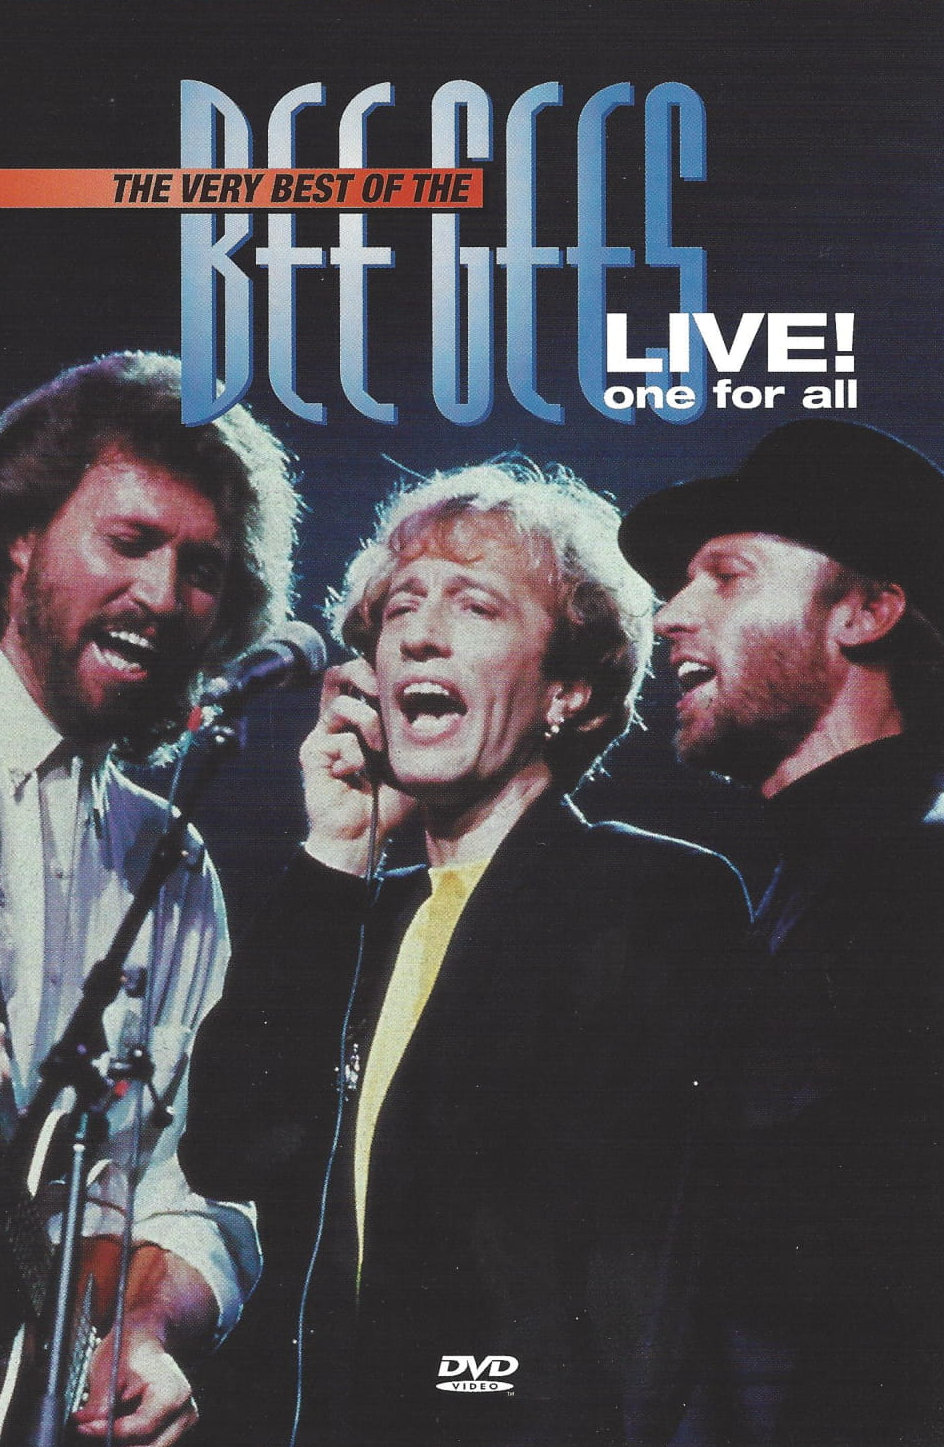 The Bee Gees - Very Best Of The Bee Gees Live